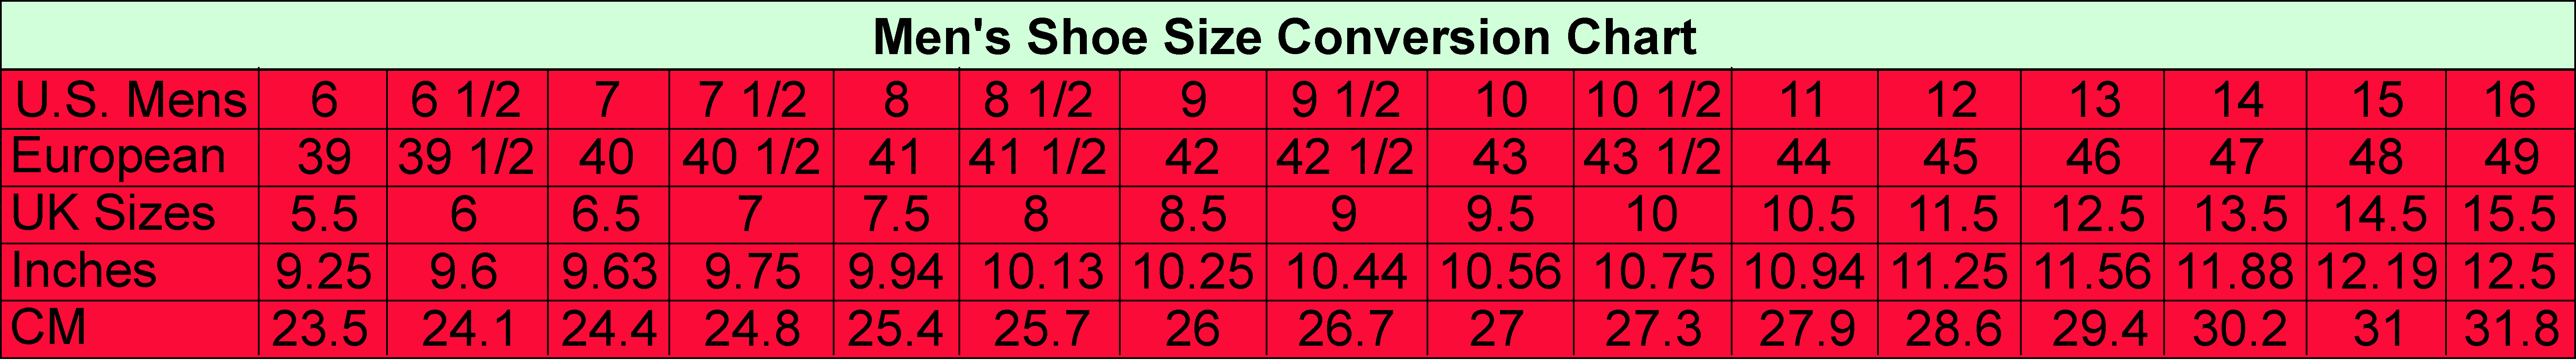 Chart for converting men's shoe sizes